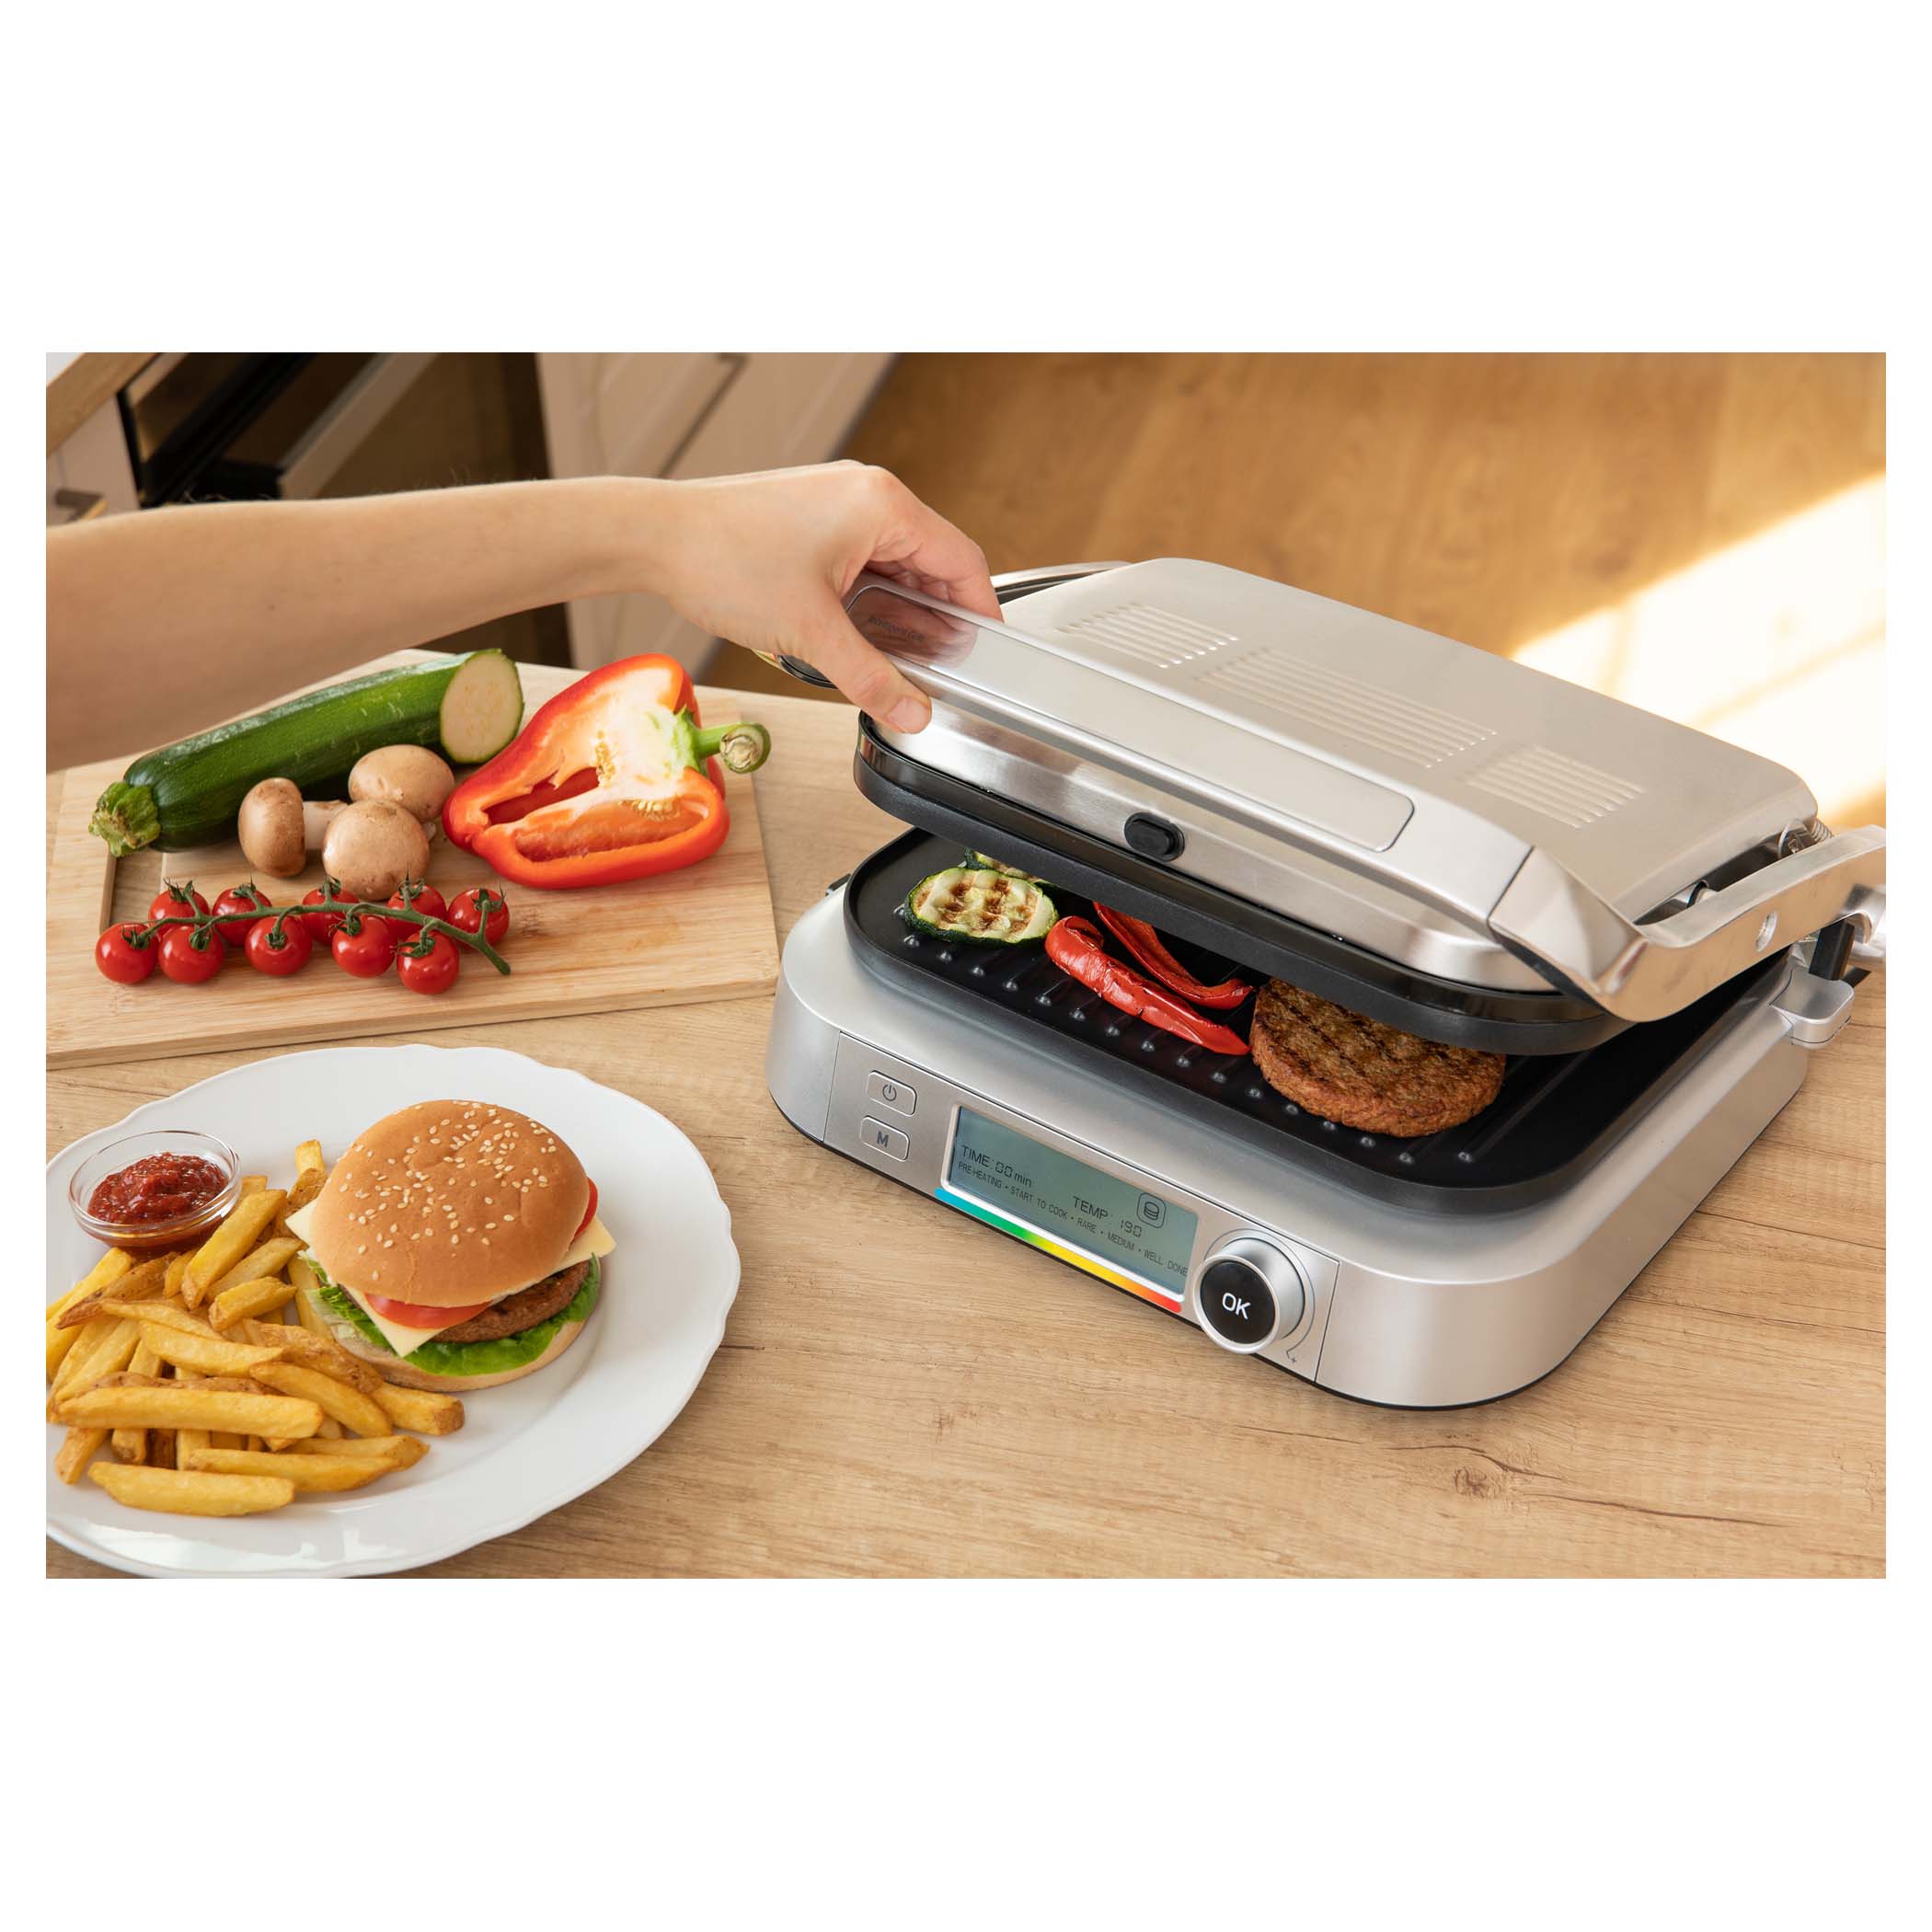 Cuisinart Series Griddler Five Multi-Purpose Contact Grill, Silver